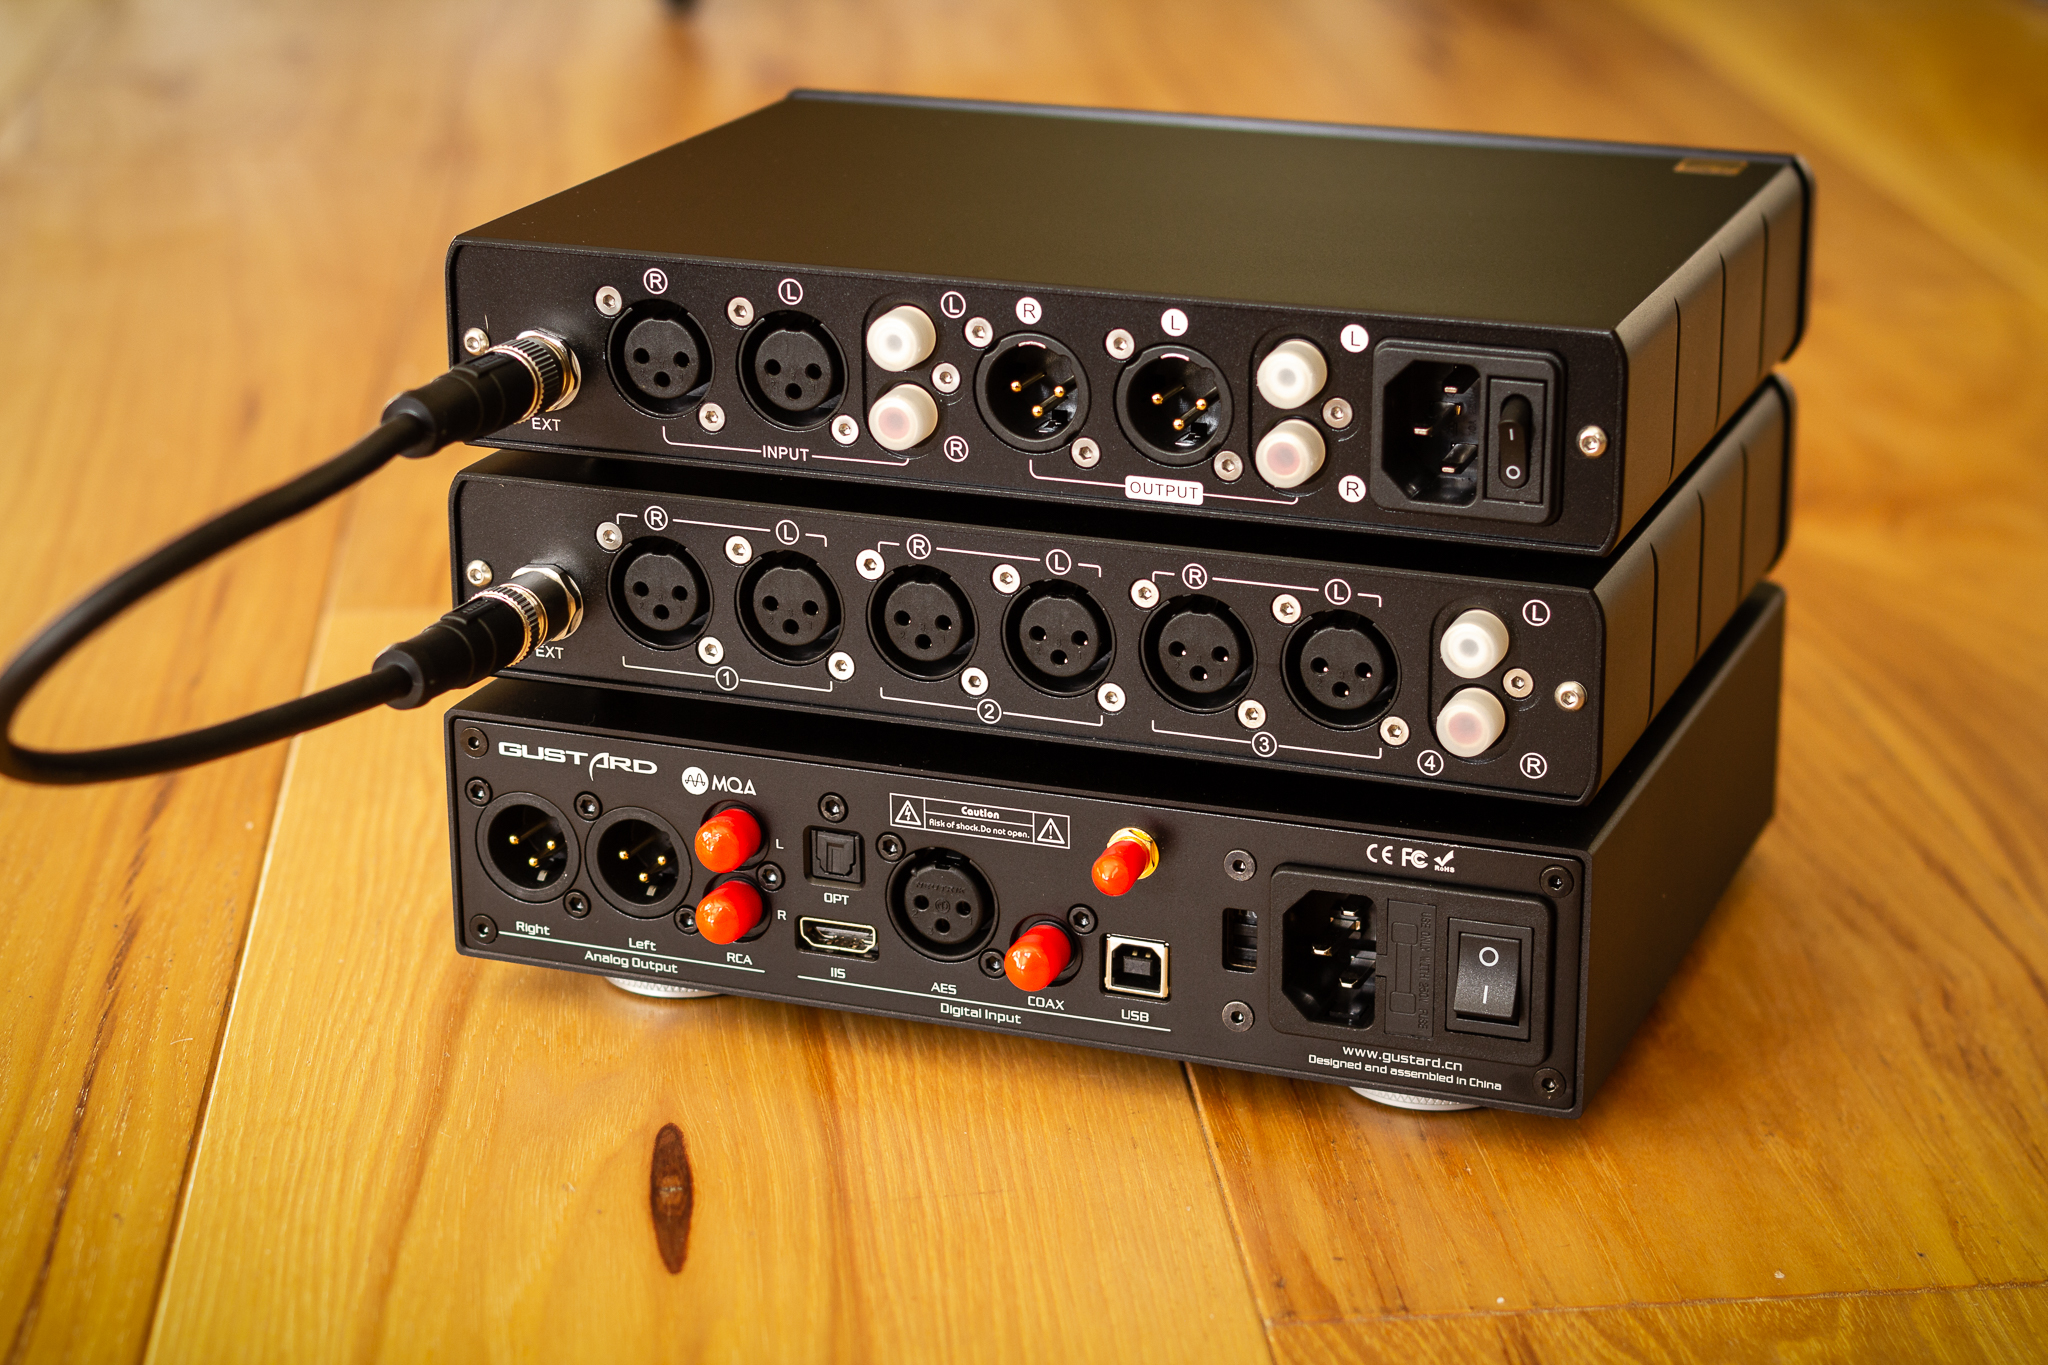 Photo showing the rear connections on the DAC and preamp